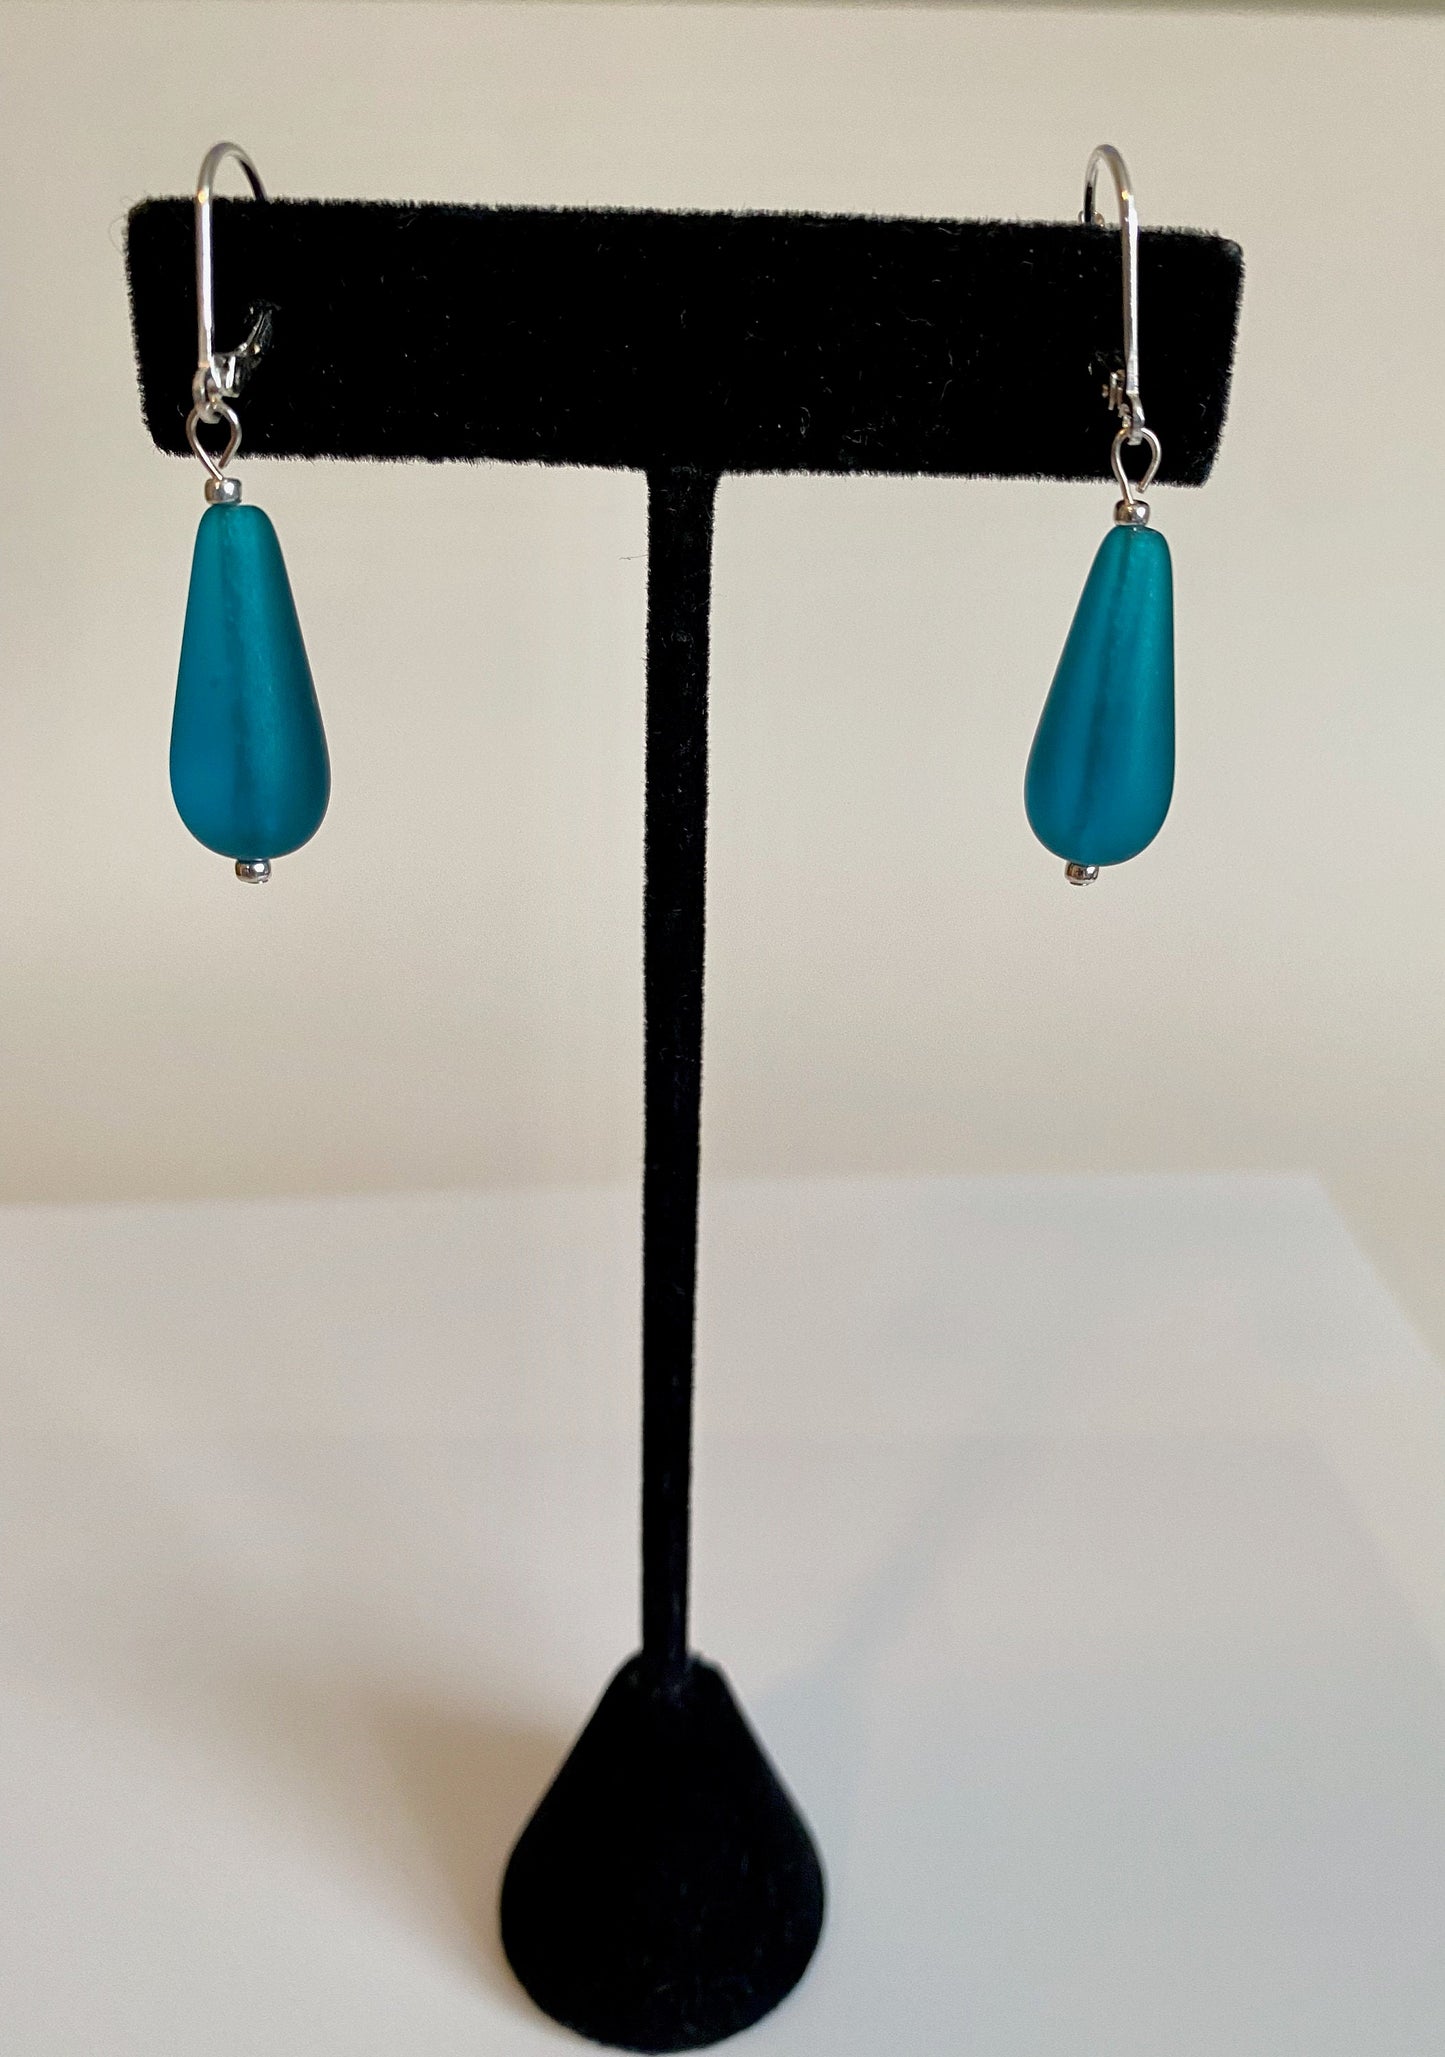 Soft sea glass type frosted teal color teardrop earrings. Fashioned with a quality sterling silver lever back clasp.